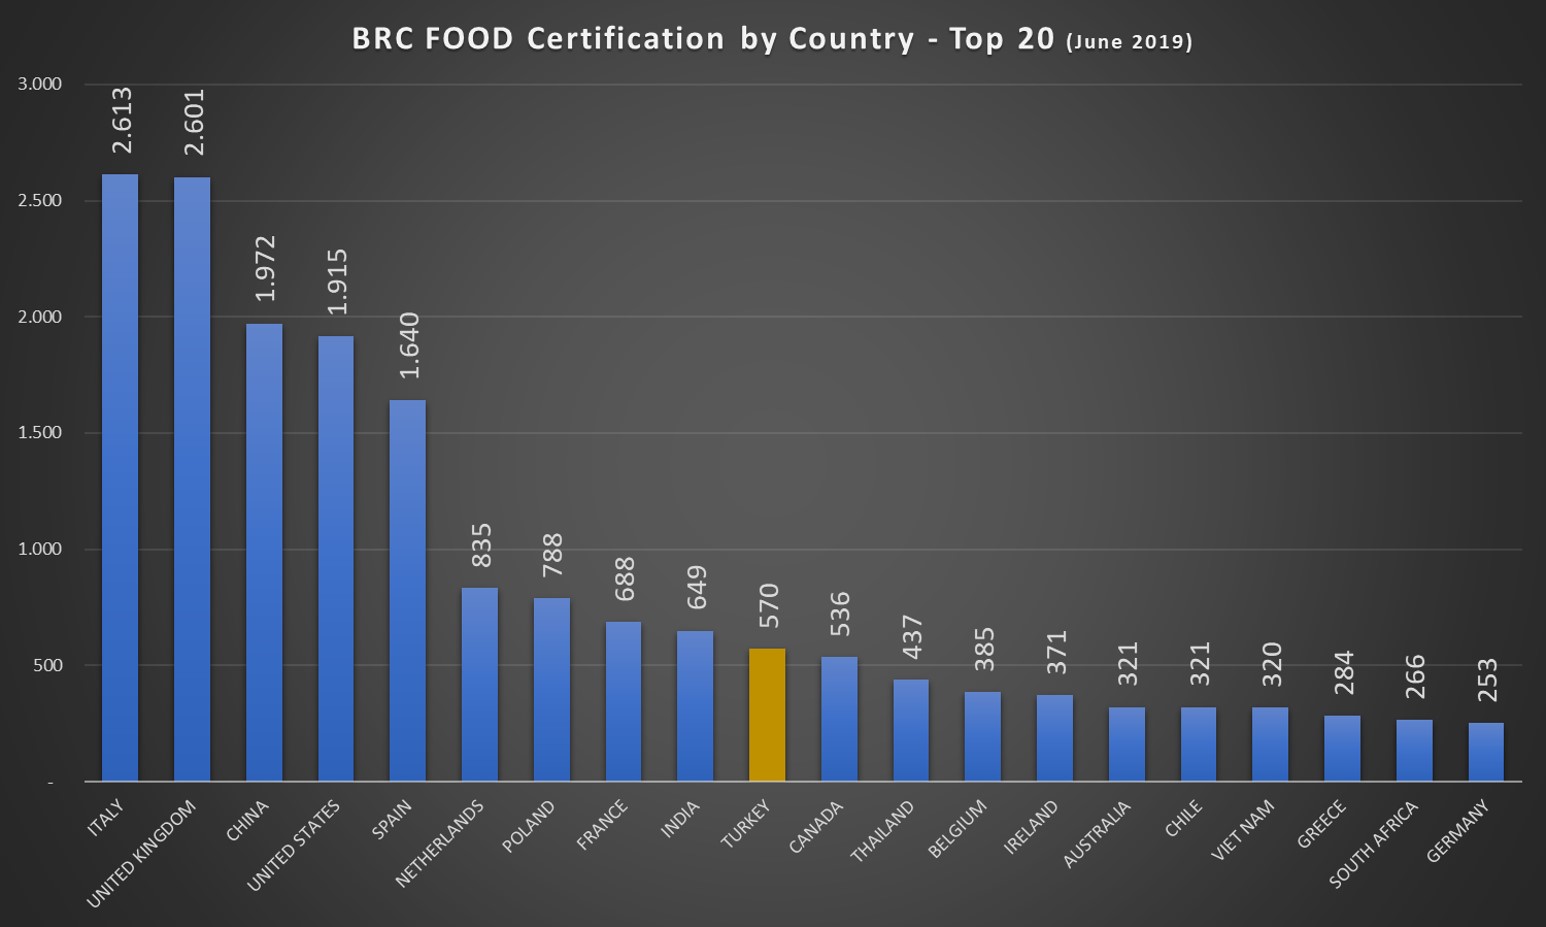 BRC Food Certification Top 20 Country